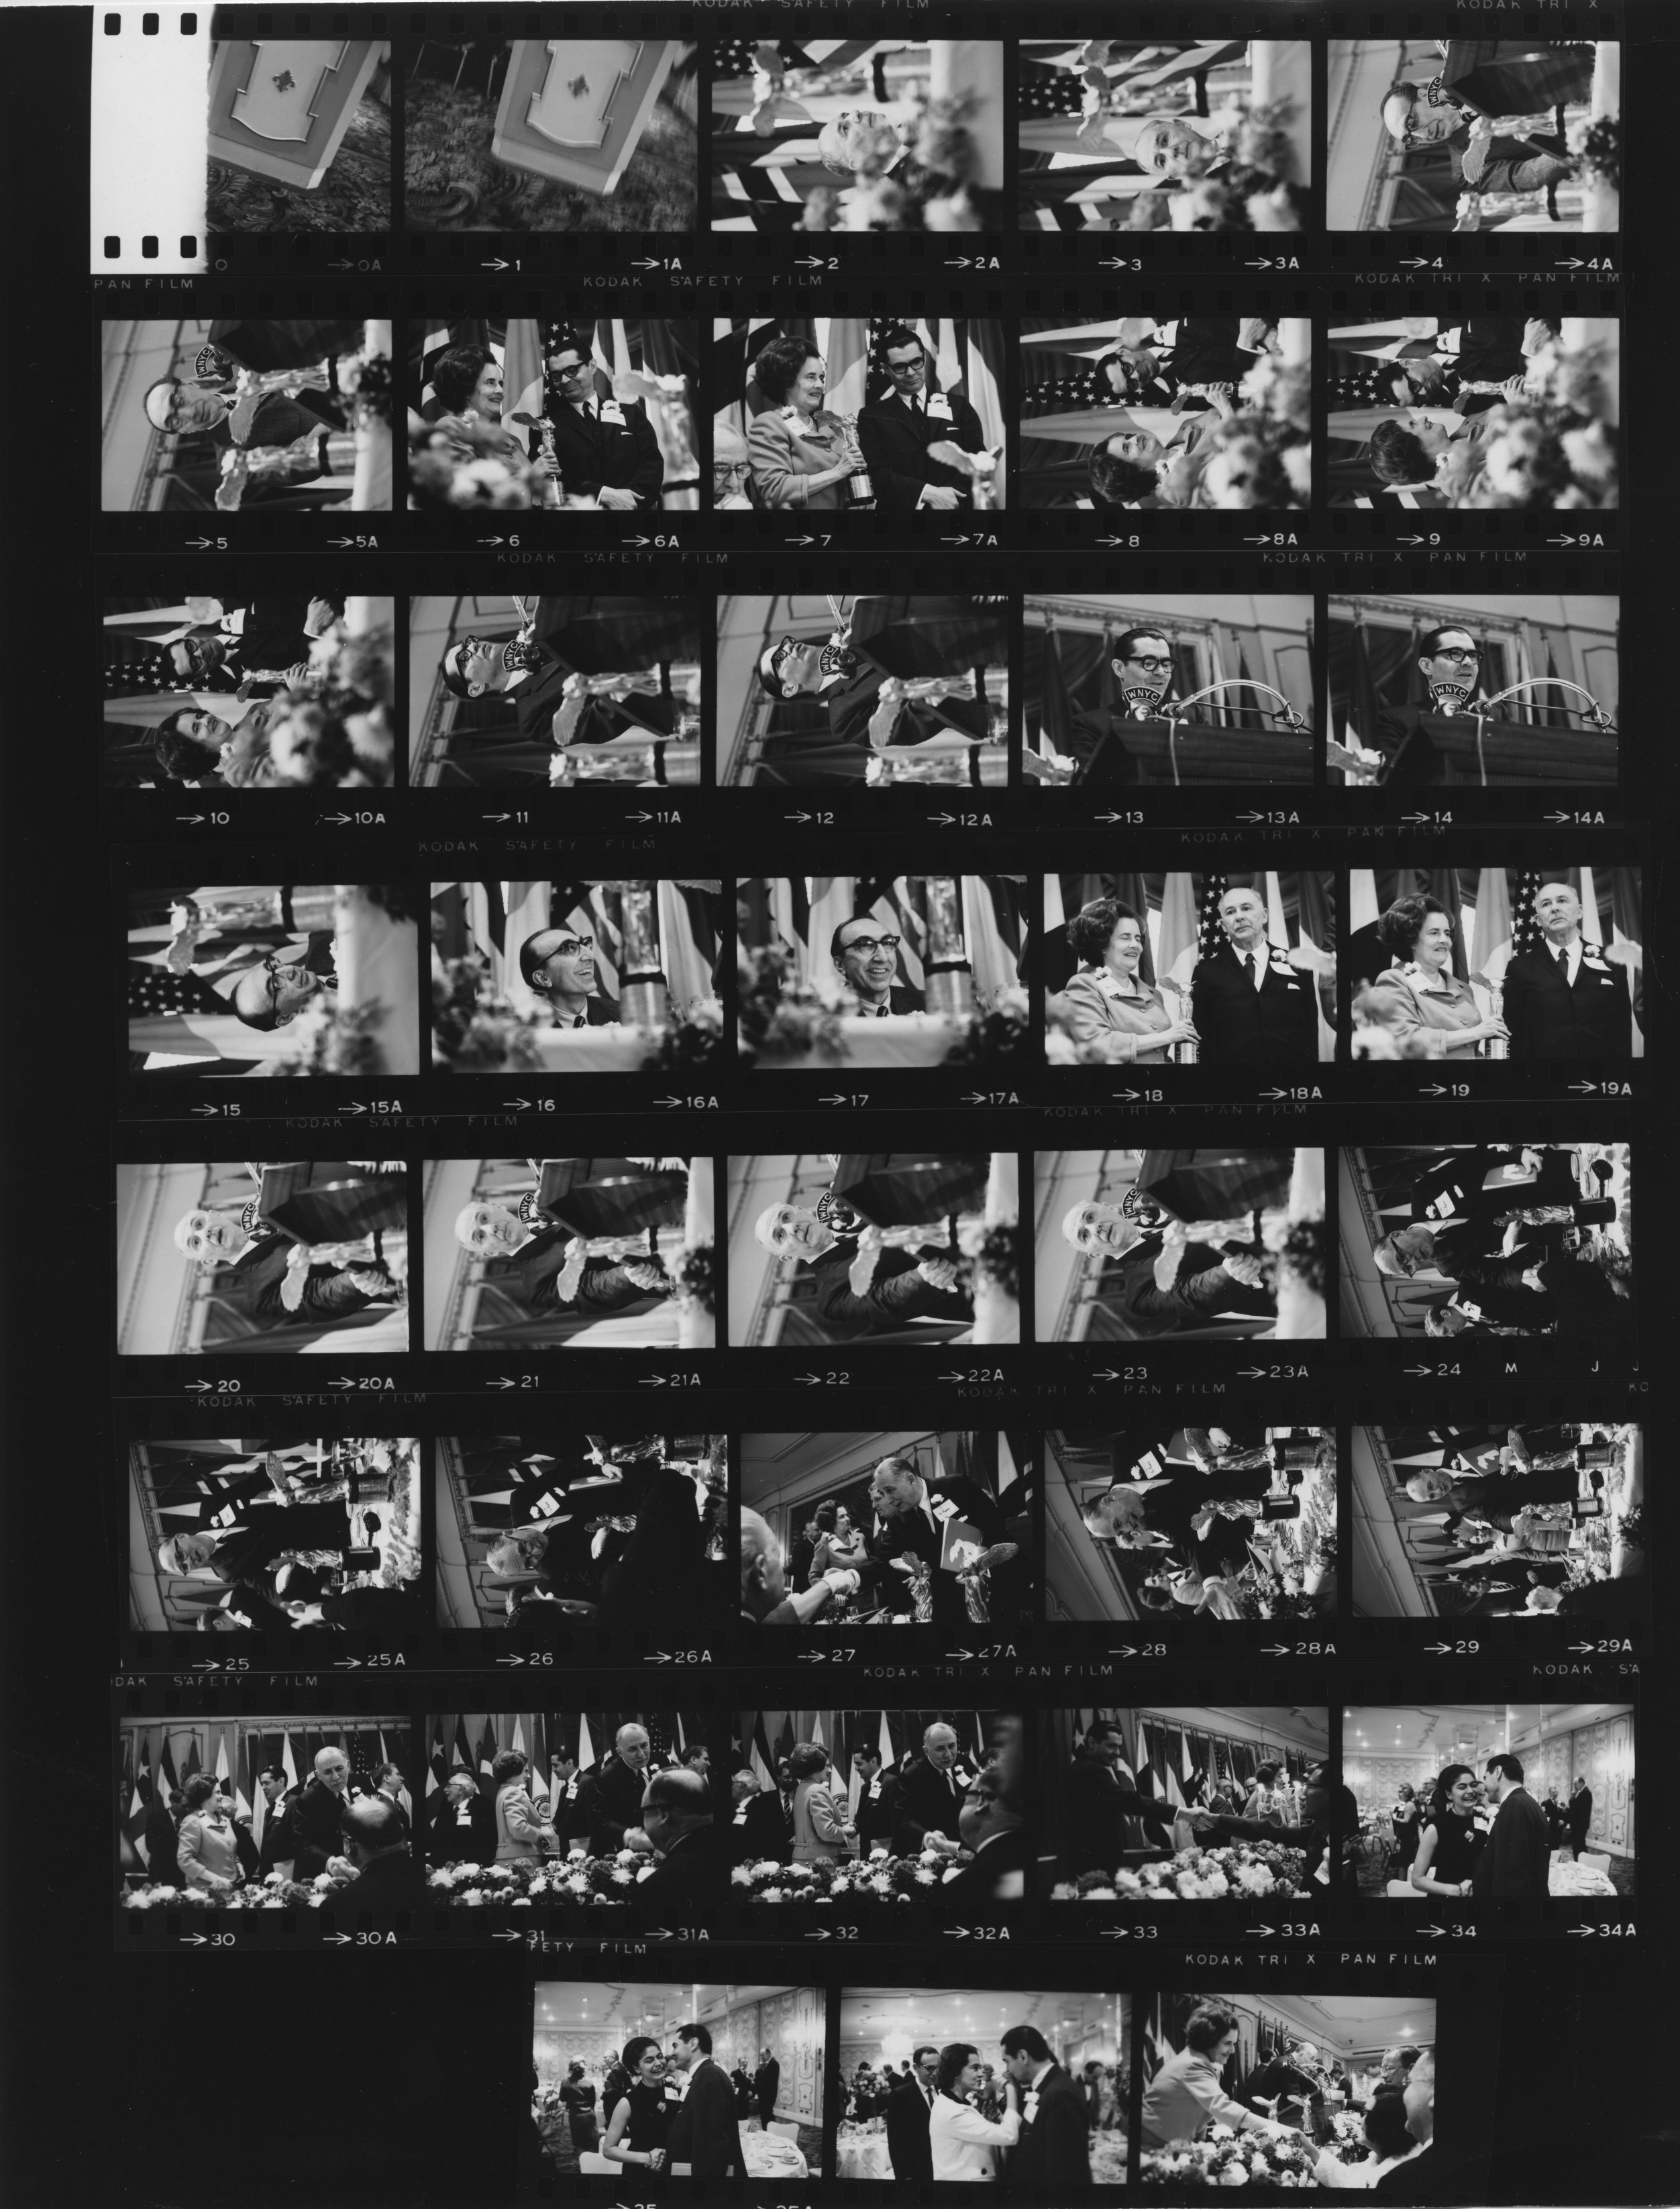 Contact Sheet from 1966 Lasker Awards. Individuals in the image include: Dr. Sidney Farber, Dr. Michael E. DeBakey, Mary Lasker, Dr. George E. Palade. Photographer, Mottke Weissman. [Medical World News Collection, McGovern Historical Center, IC077, Folder 21.9, negative# MW-250A-04]